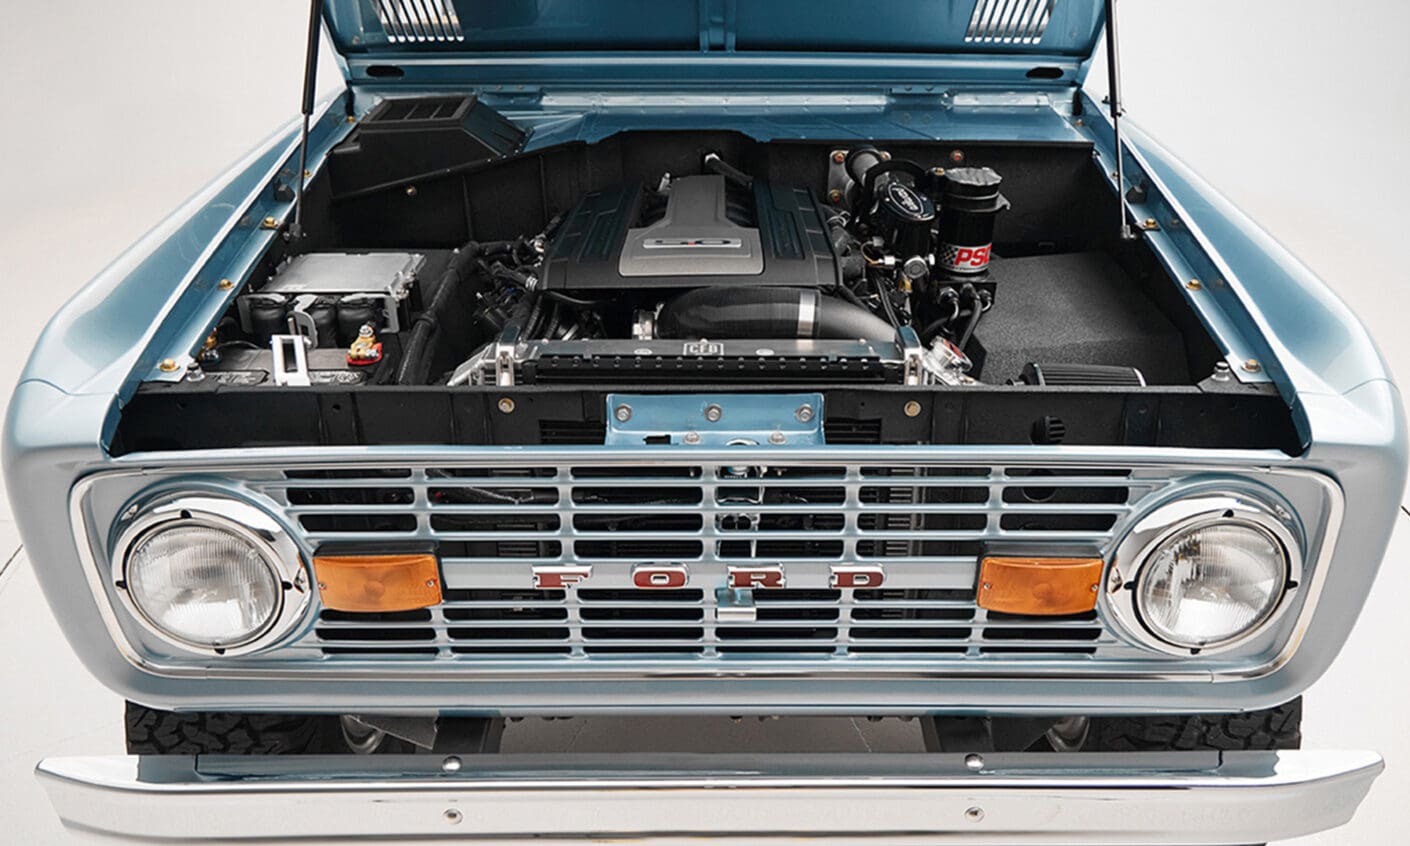 1975 ford bronco painted brittany blue with 3rd gen ford racing coyote motor